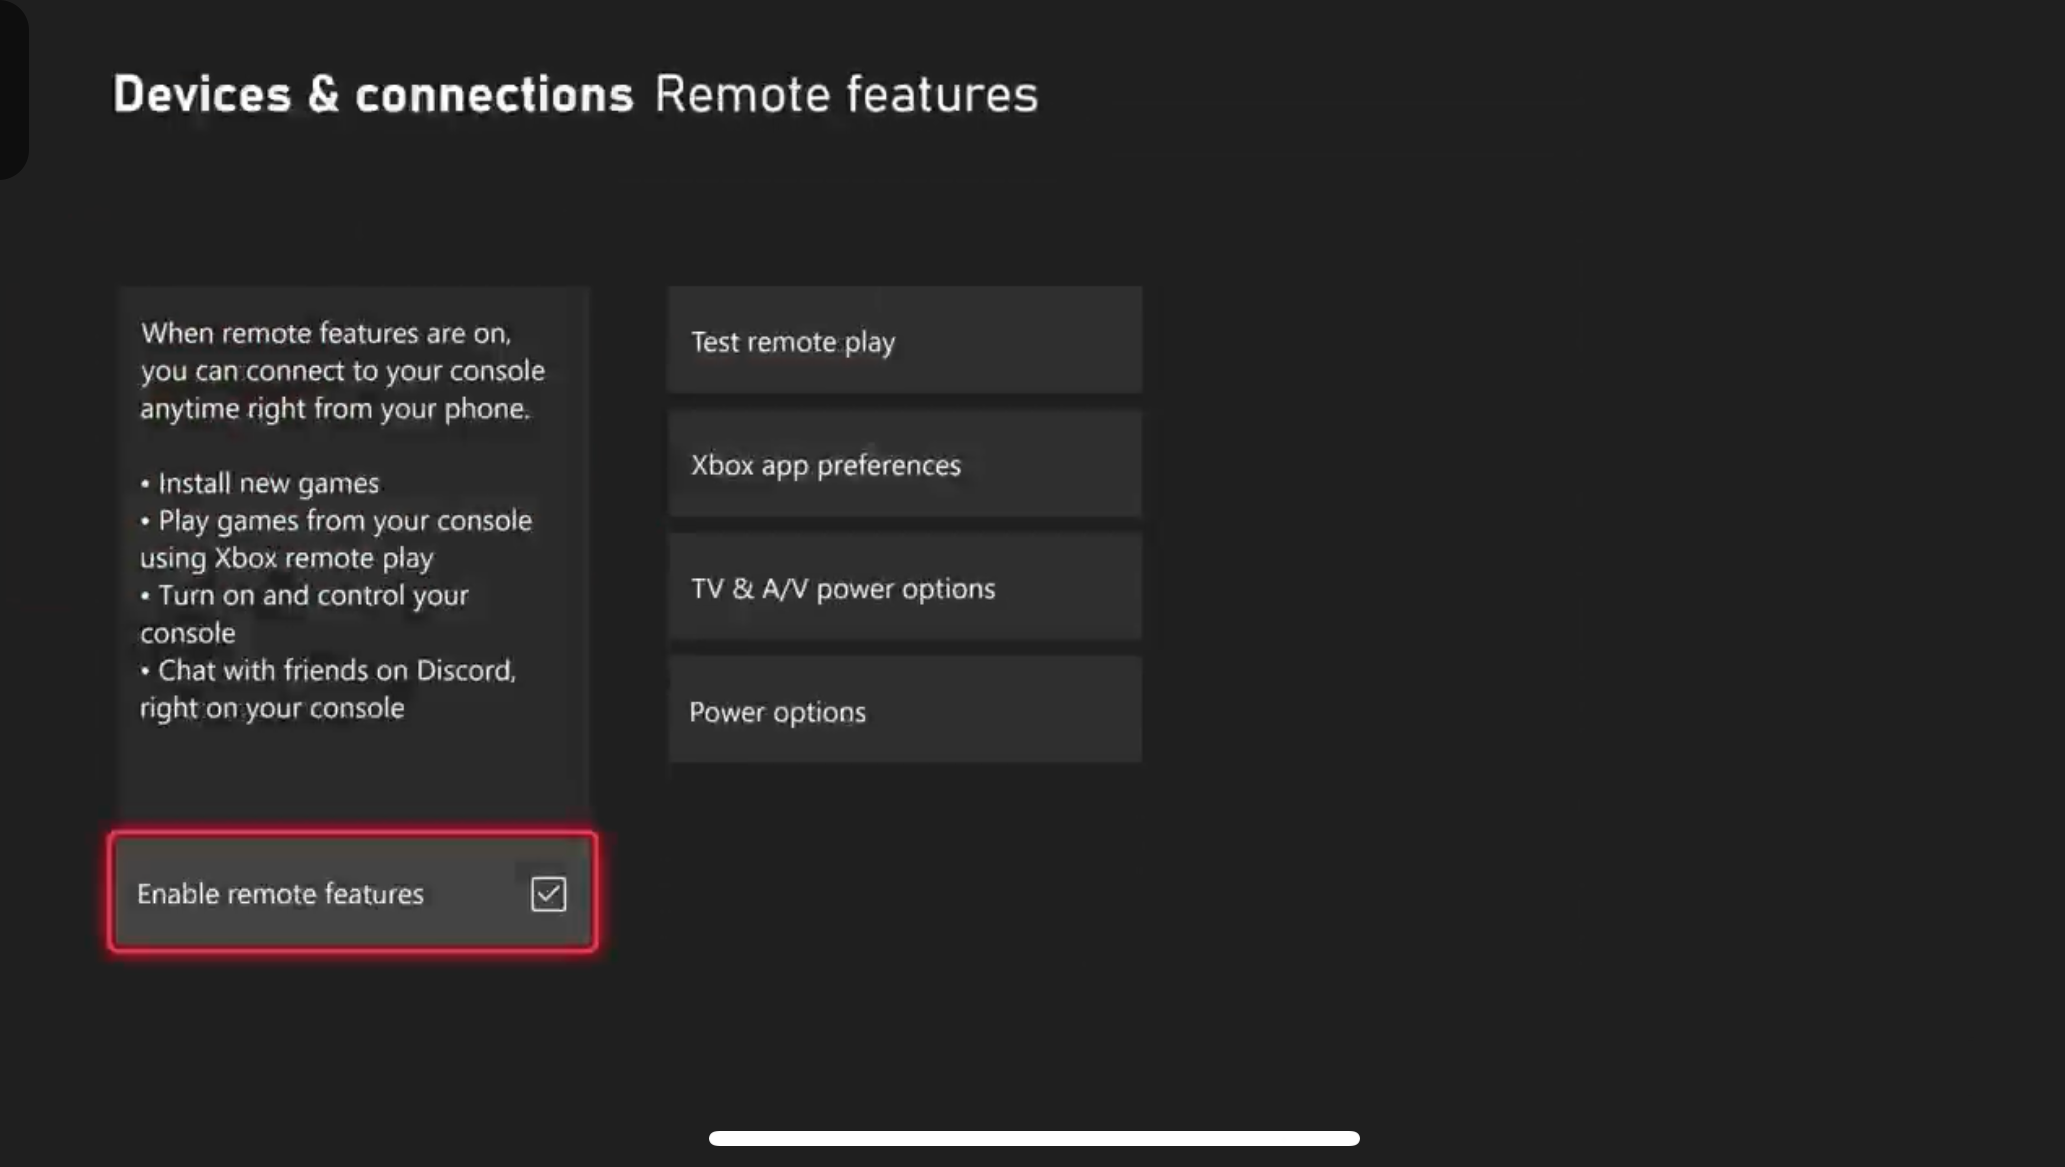 Enable remote features on your Xbox to use Discord